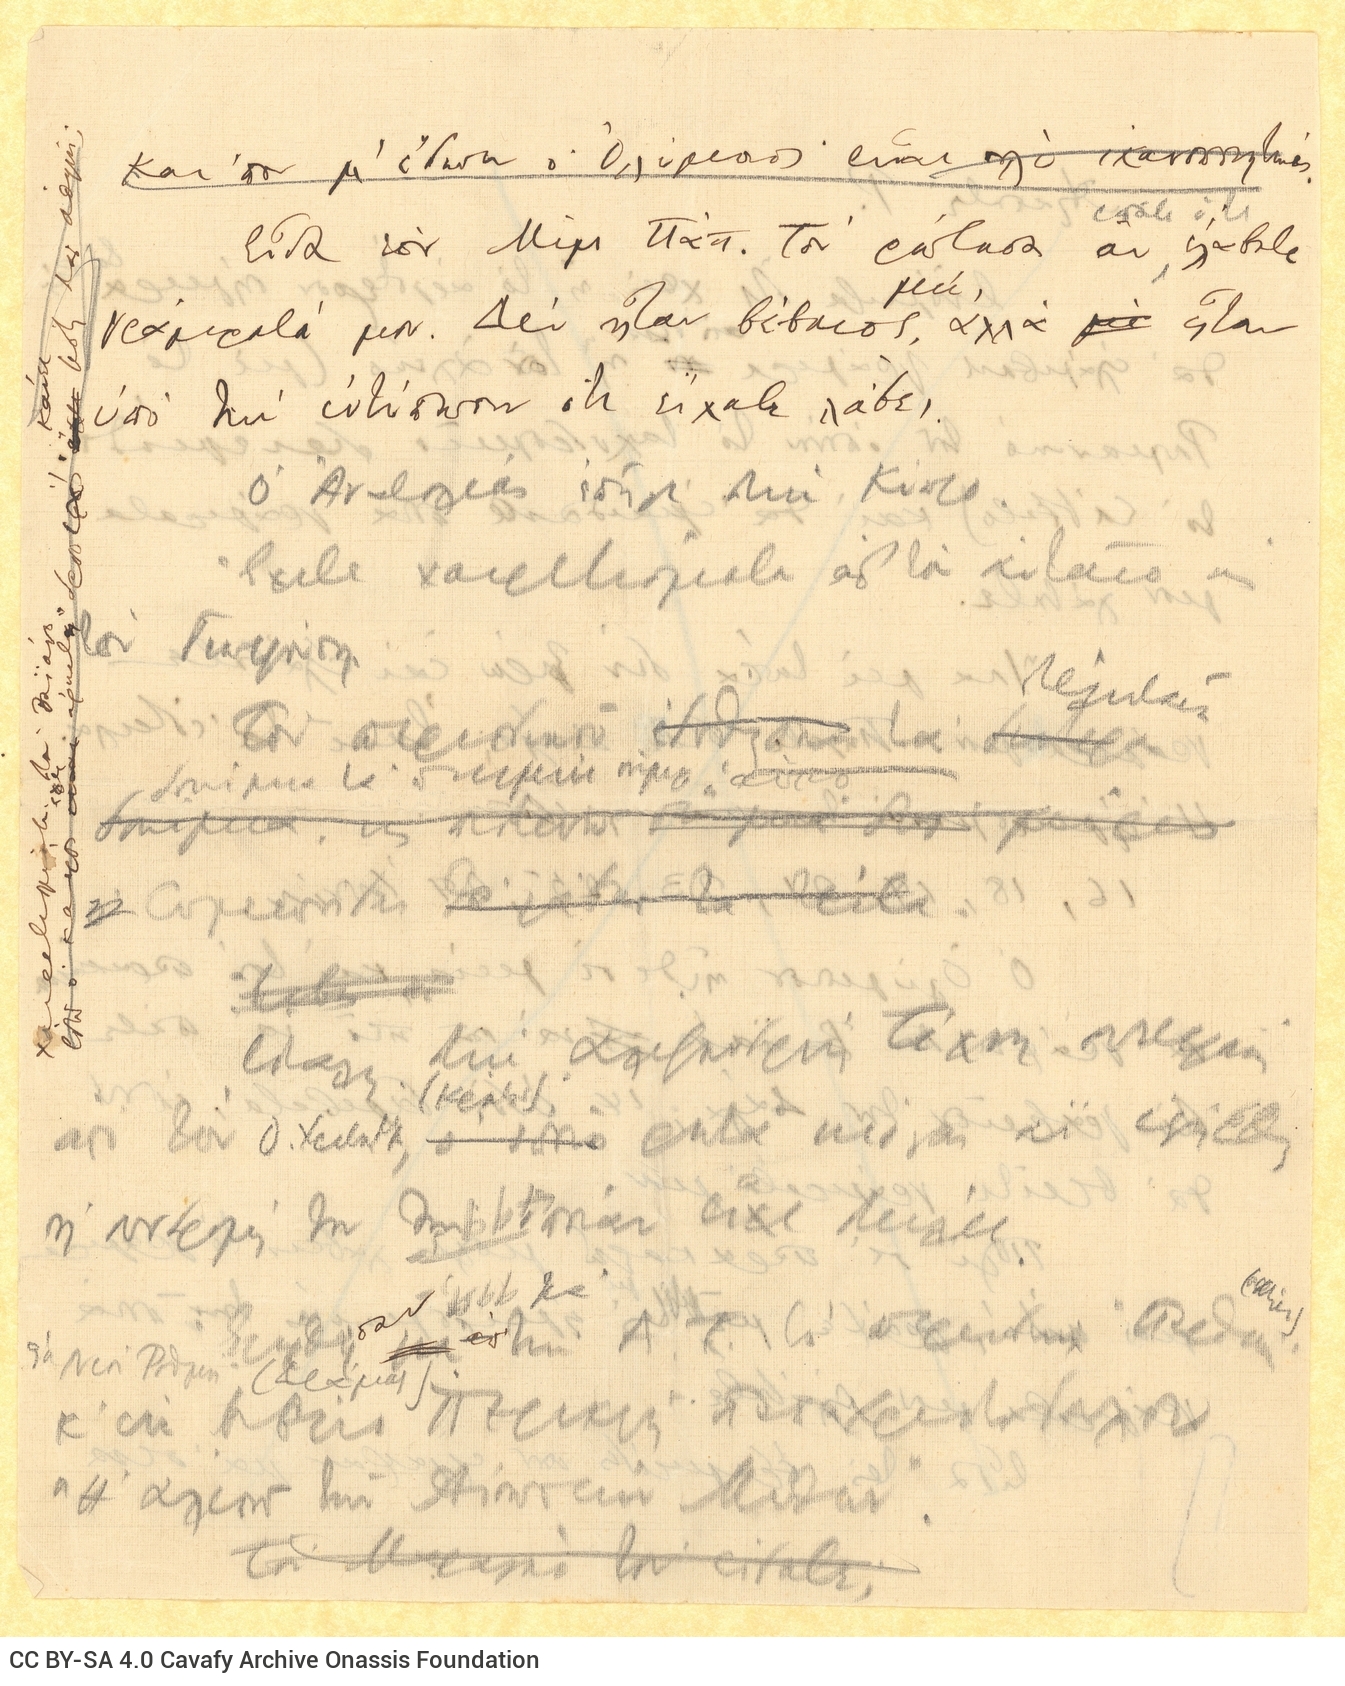 Handwritten draft letter by Cavafy to R[ica Singopoulo] on three sheets of different sizes. The poet refers to the correspond